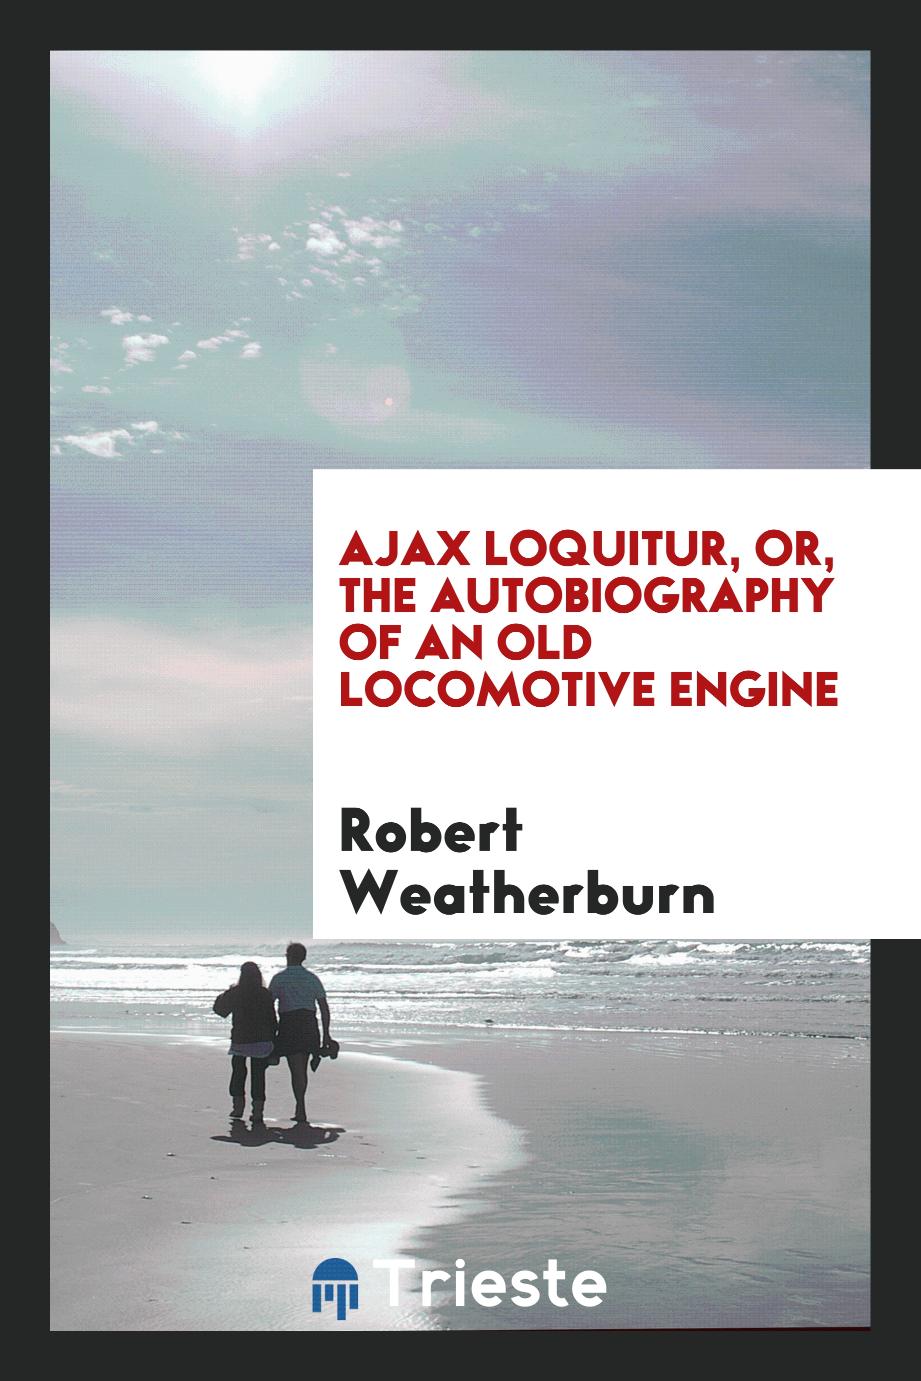 Ajax Loquitur, or, the Autobiography of an Old Locomotive Engine